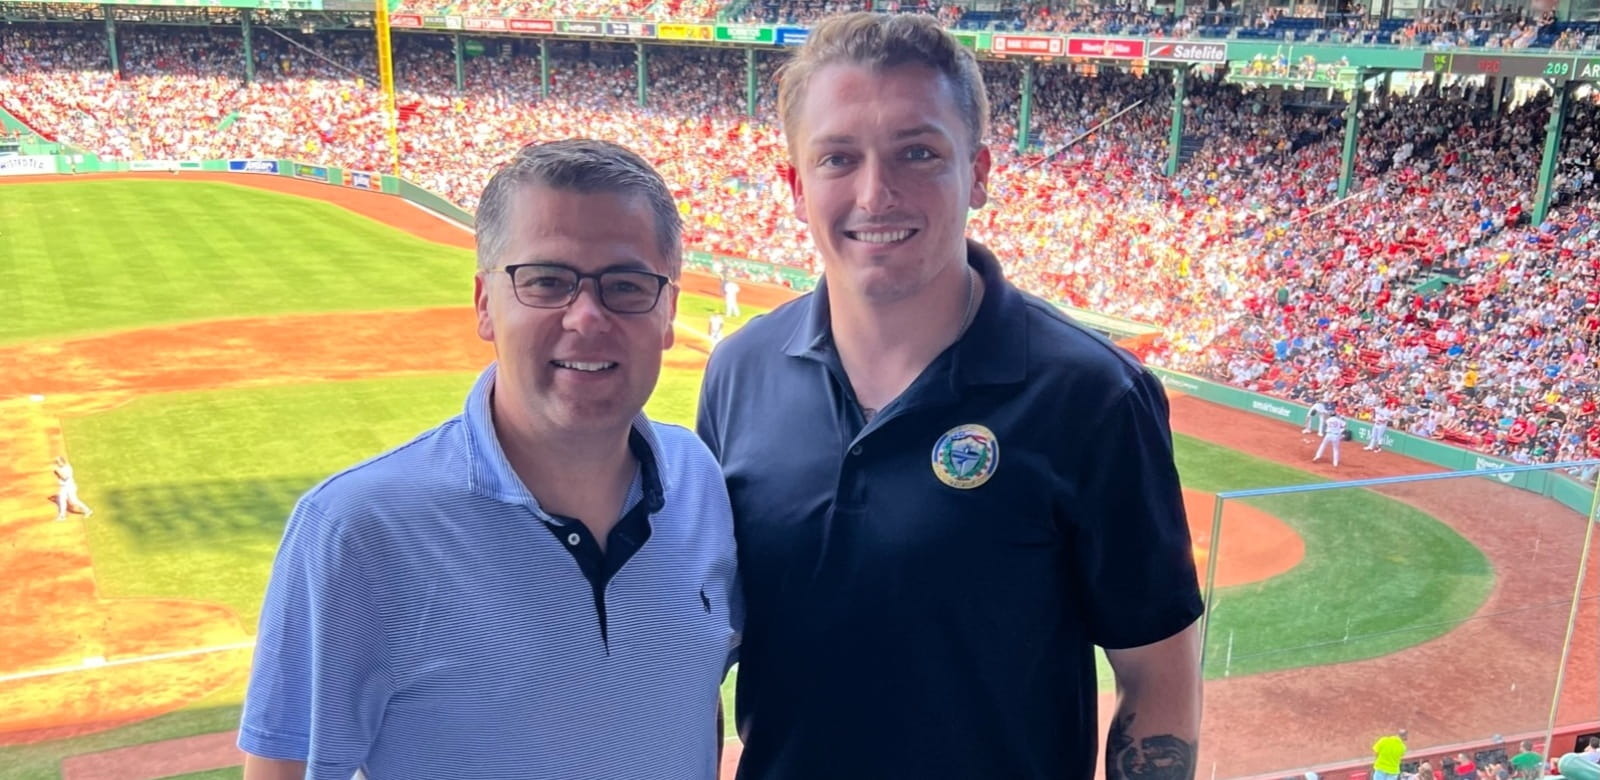 Randy Bumps, global corporate social responsibility lead for Raytheon Technologies, hosted Kenneth Sheehan and other student veterans at a Boston Red Sox game. (Photo: Randy Bumps)